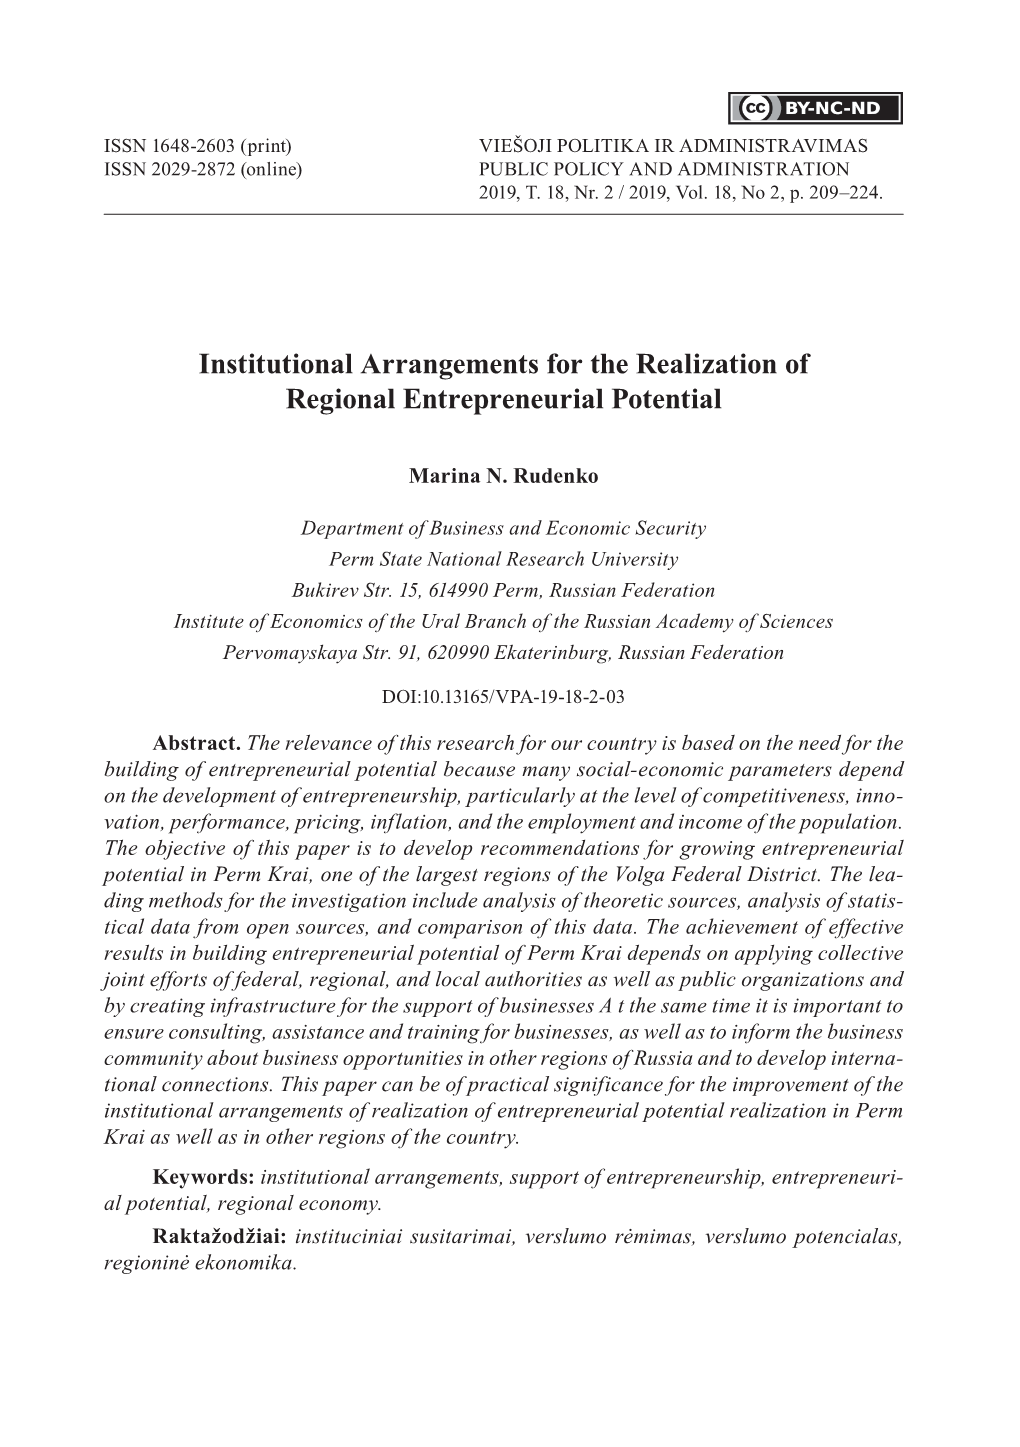 Institutional Arrangements for the Realization of Regional Entrepreneurial Potential